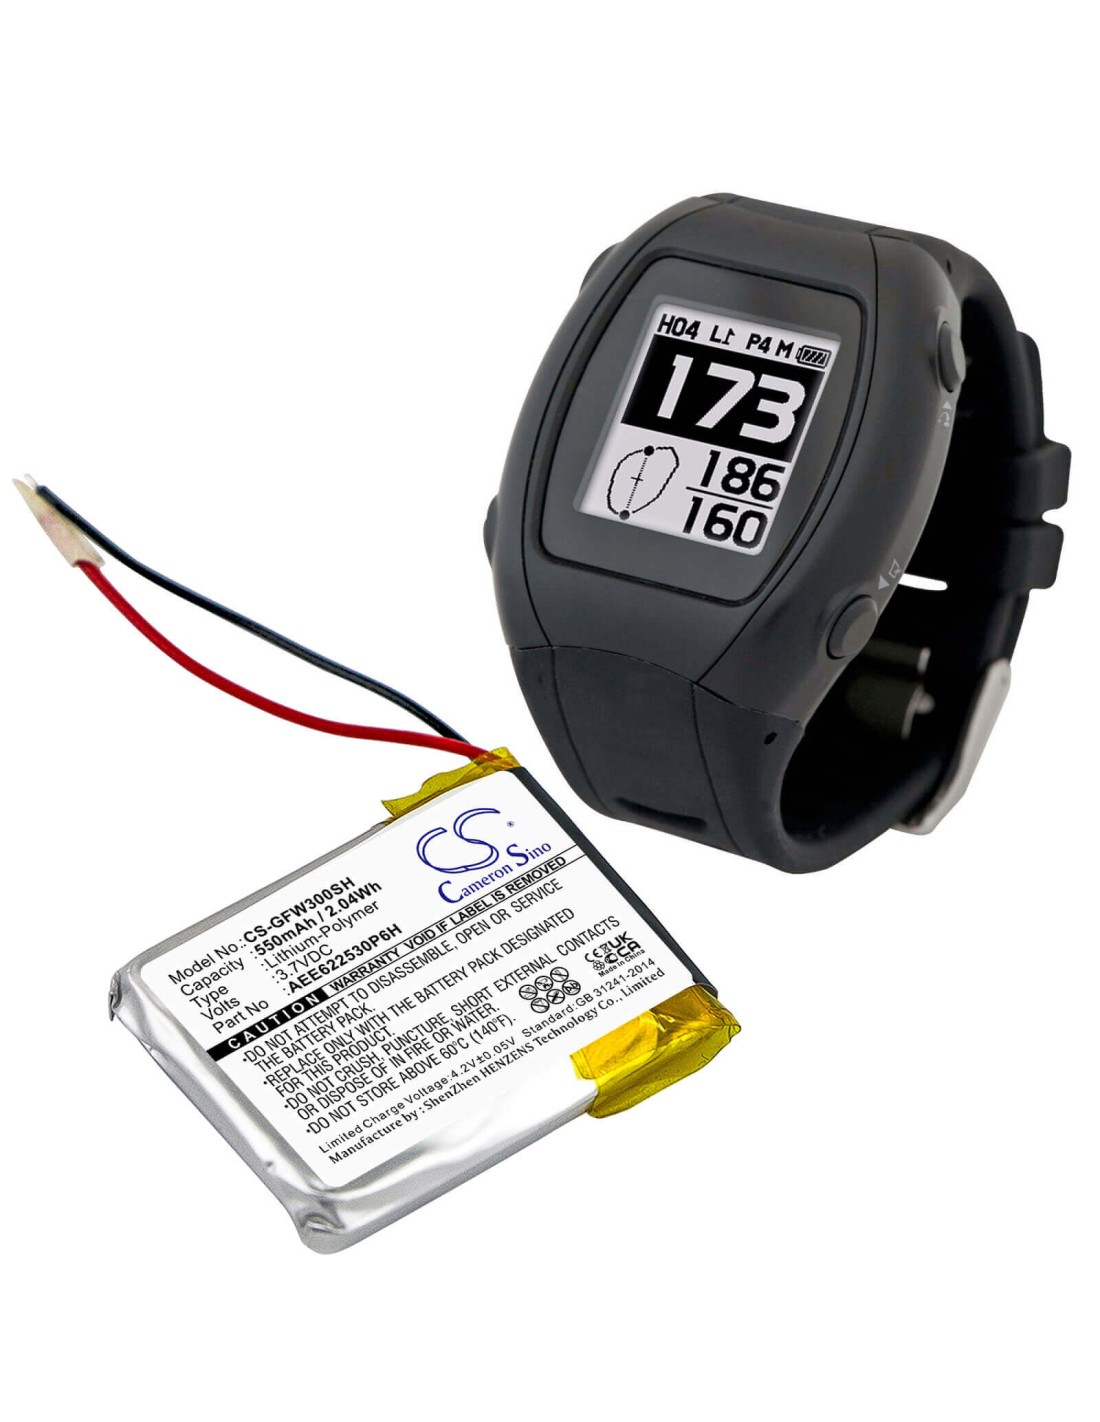 Battery for Golf Buddy, Wt3 Gps Watch 3.7V, 550mAh - 2.04Wh